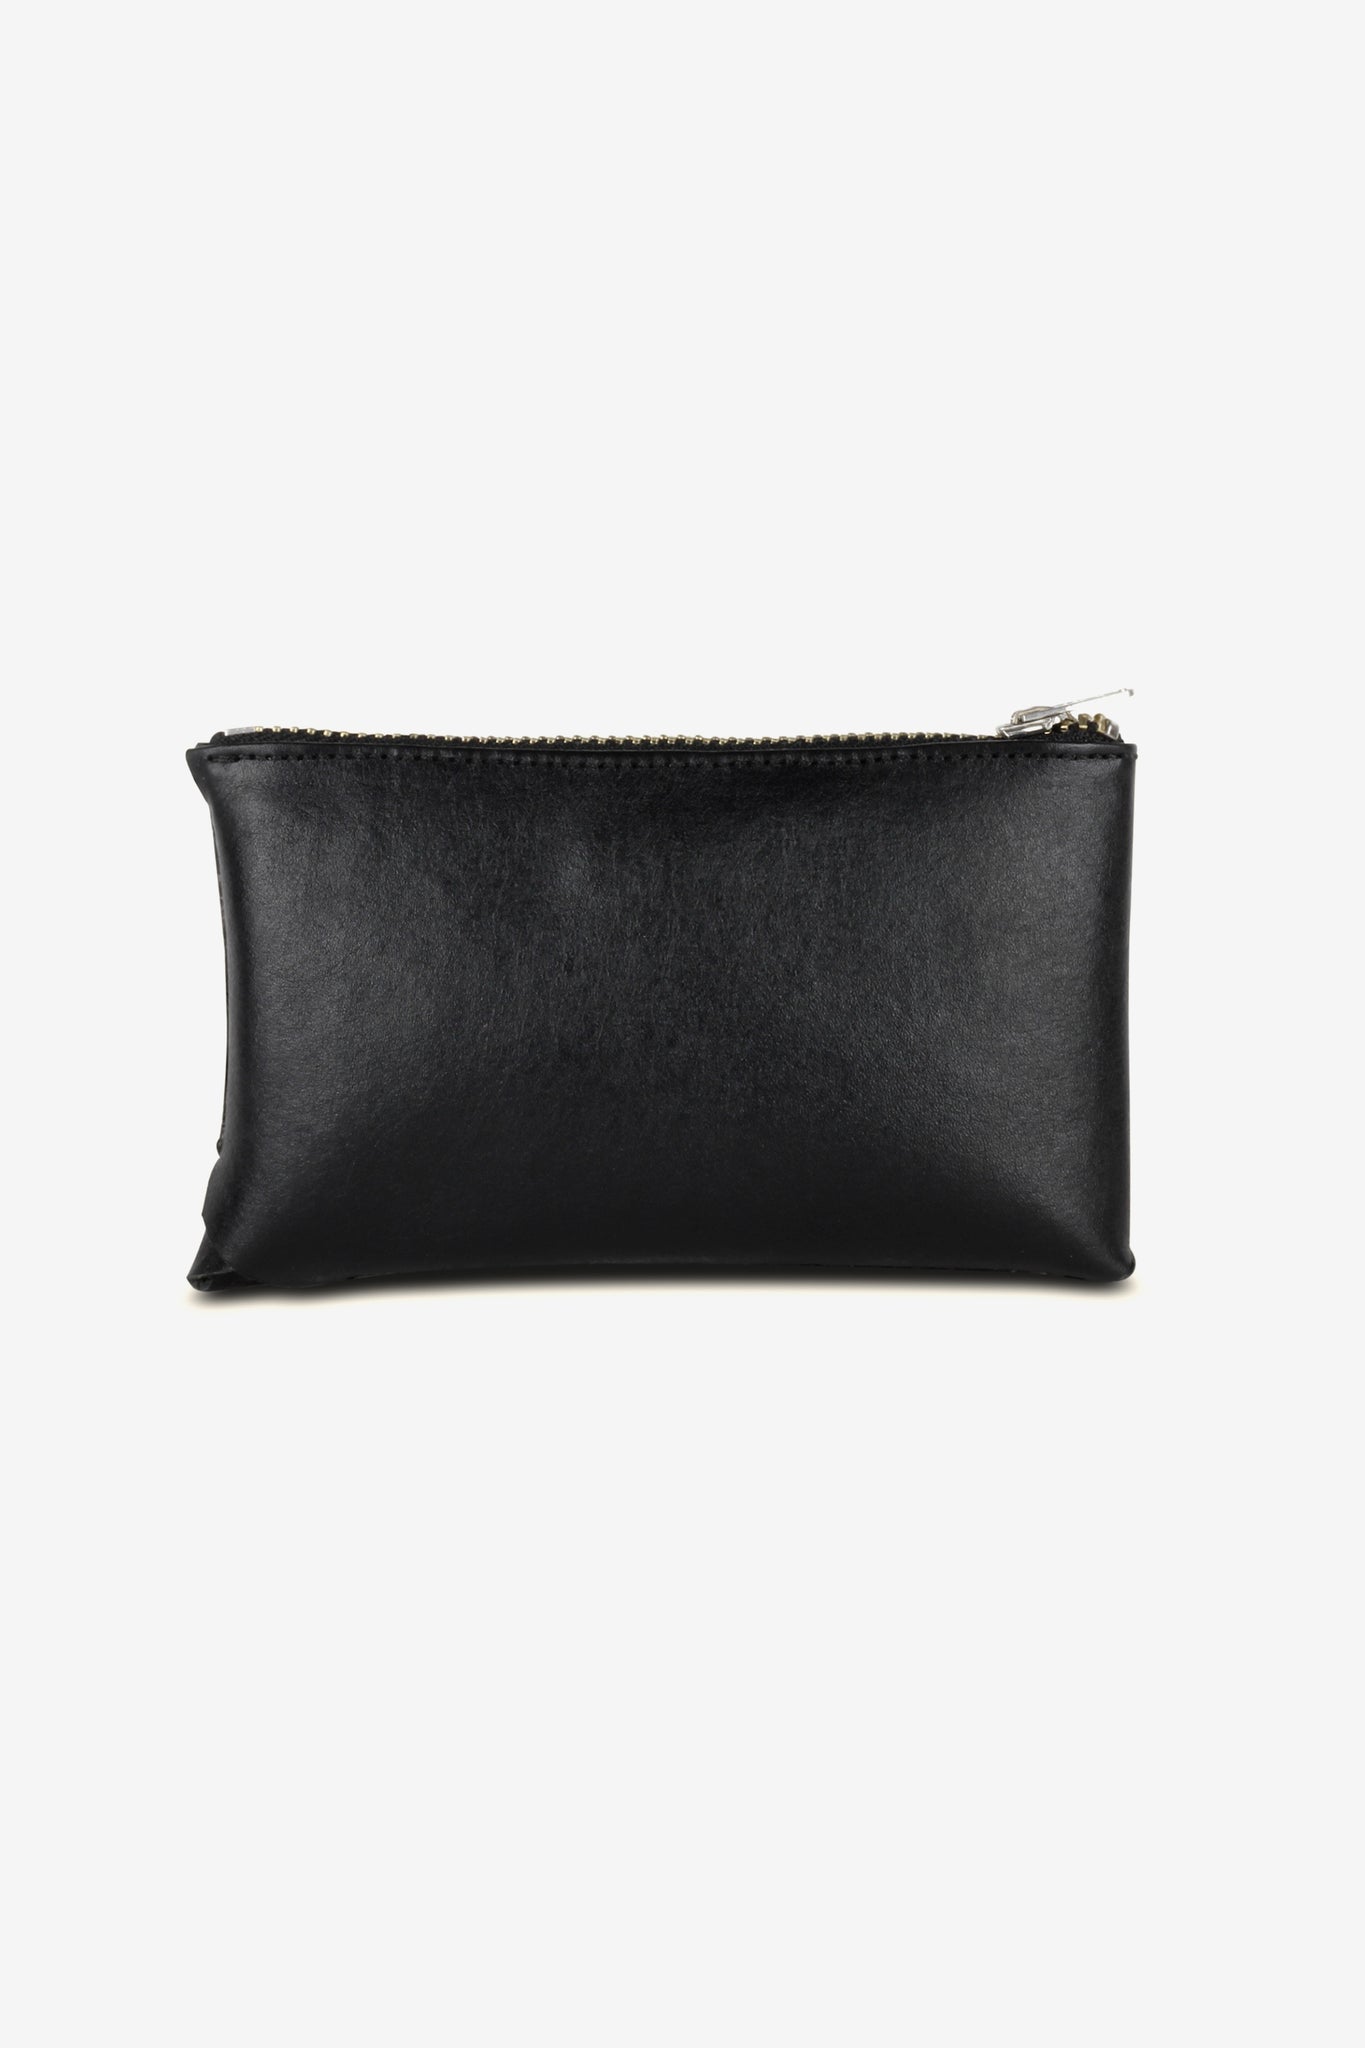 Zipped Coin Pouch, Large, Black